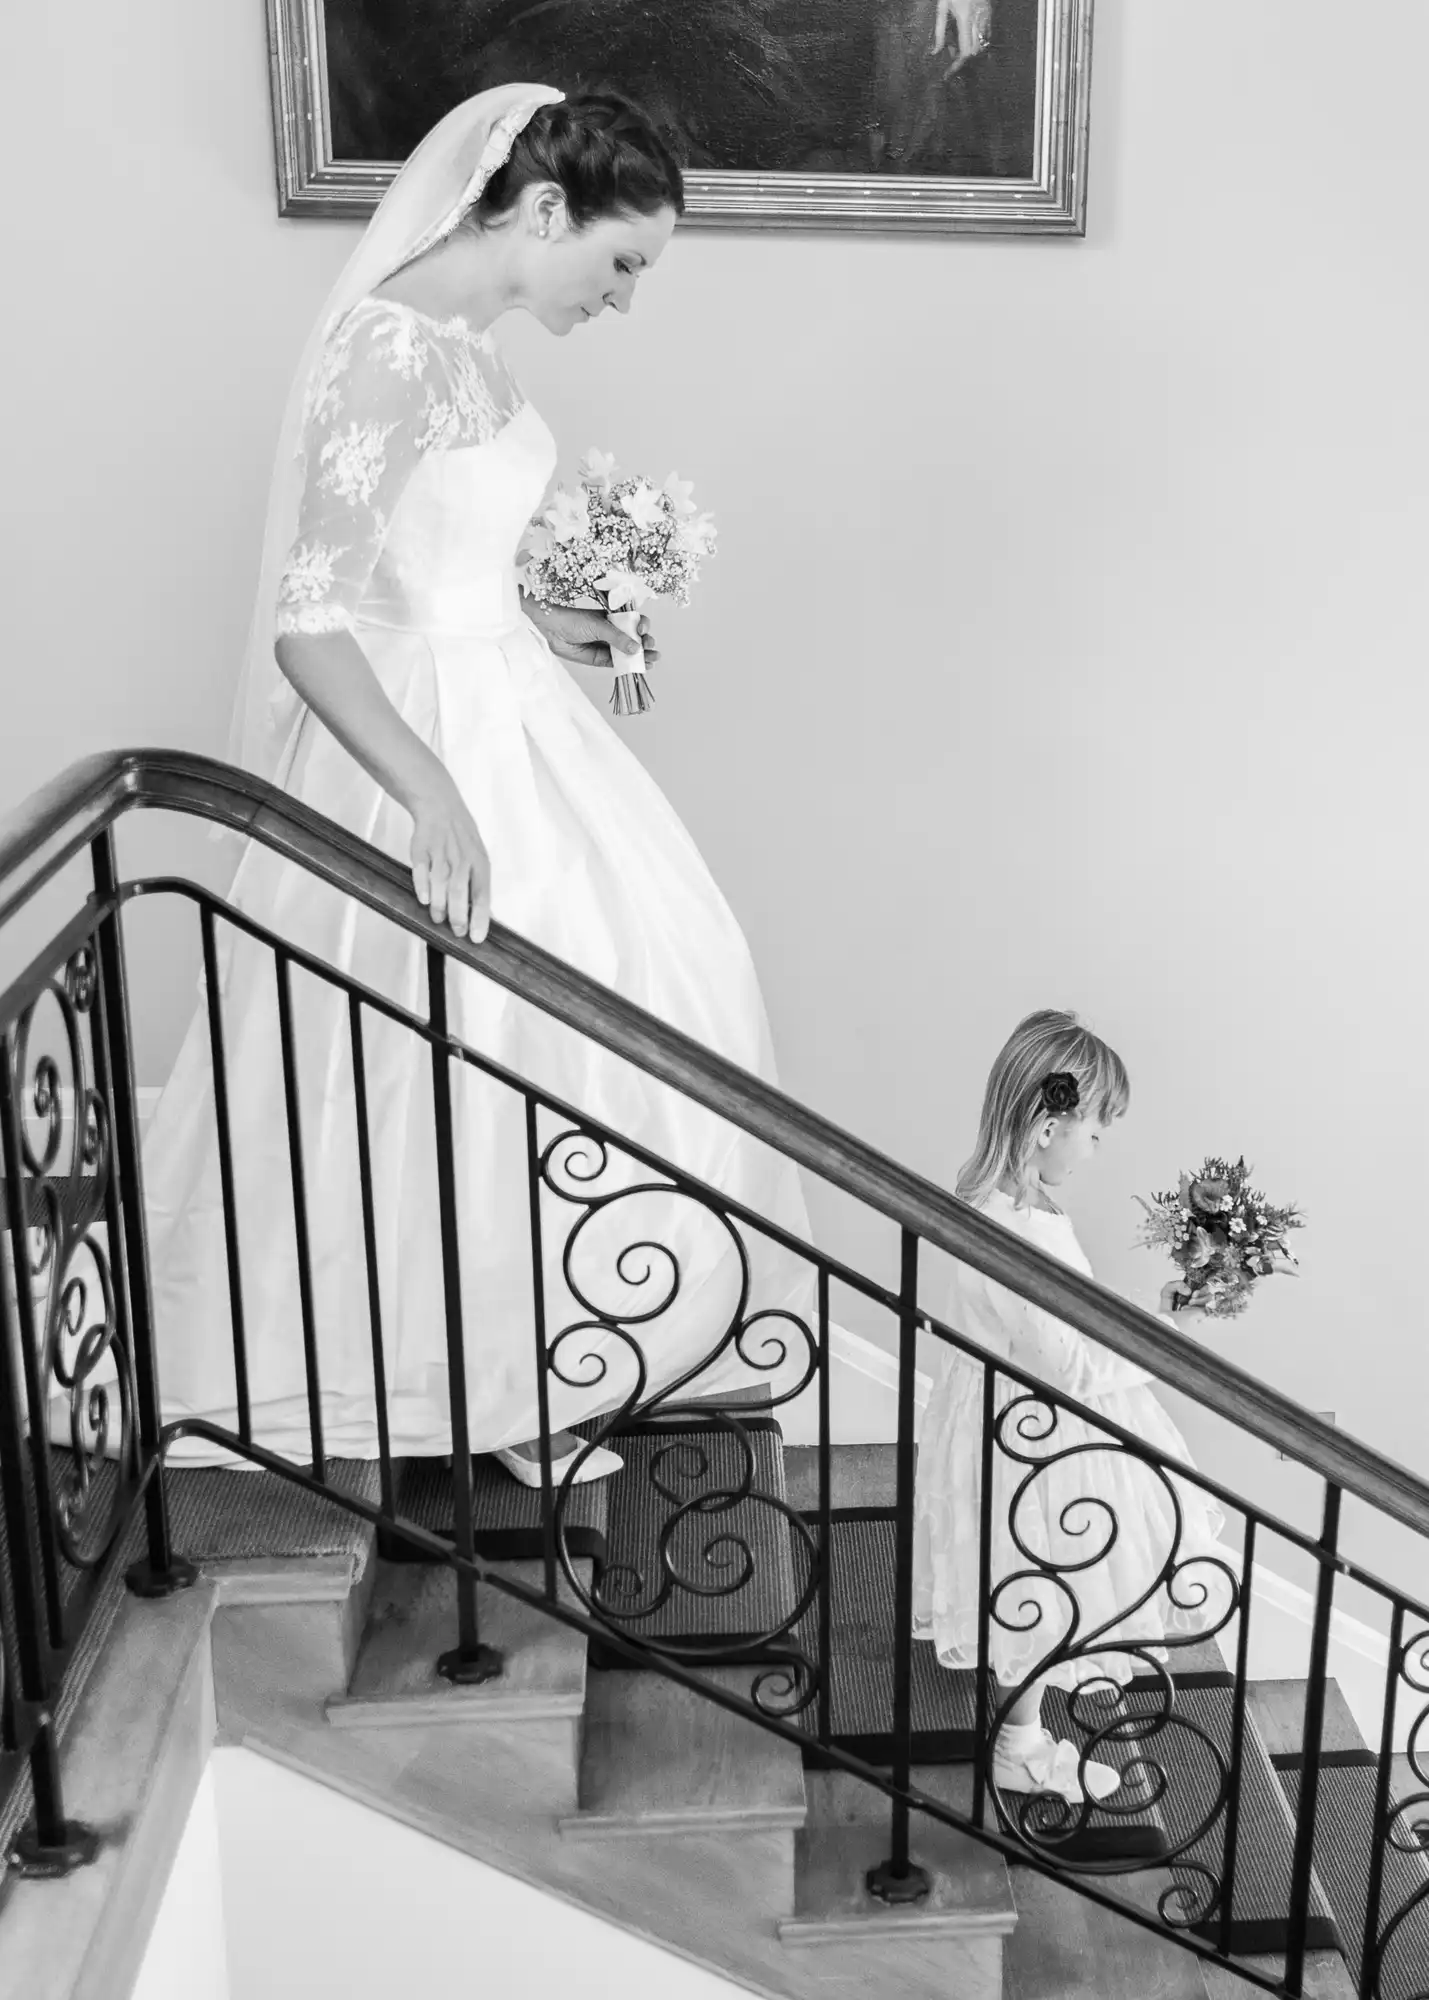 A bride in a white dress descends a staircase, smiling at a young girl holding a bouquet at the bottom. black and white photo highlighting elegant details.